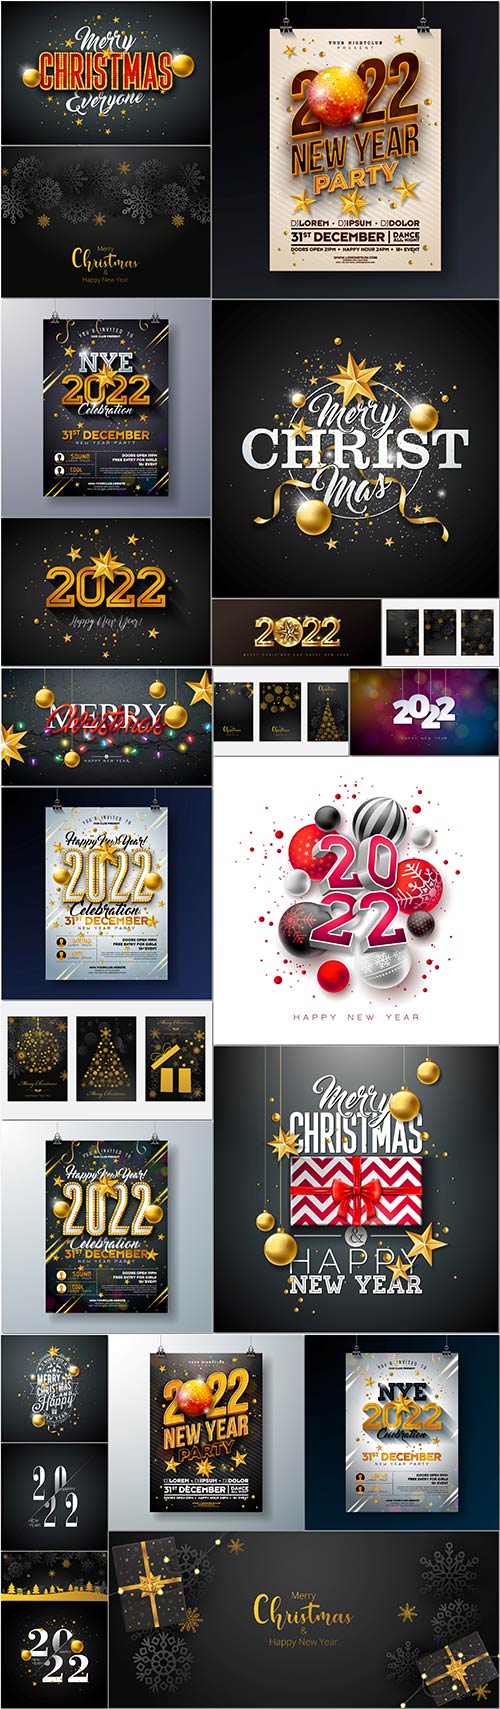 New year party celebration poster template design with d number and shiny disco ball in vector